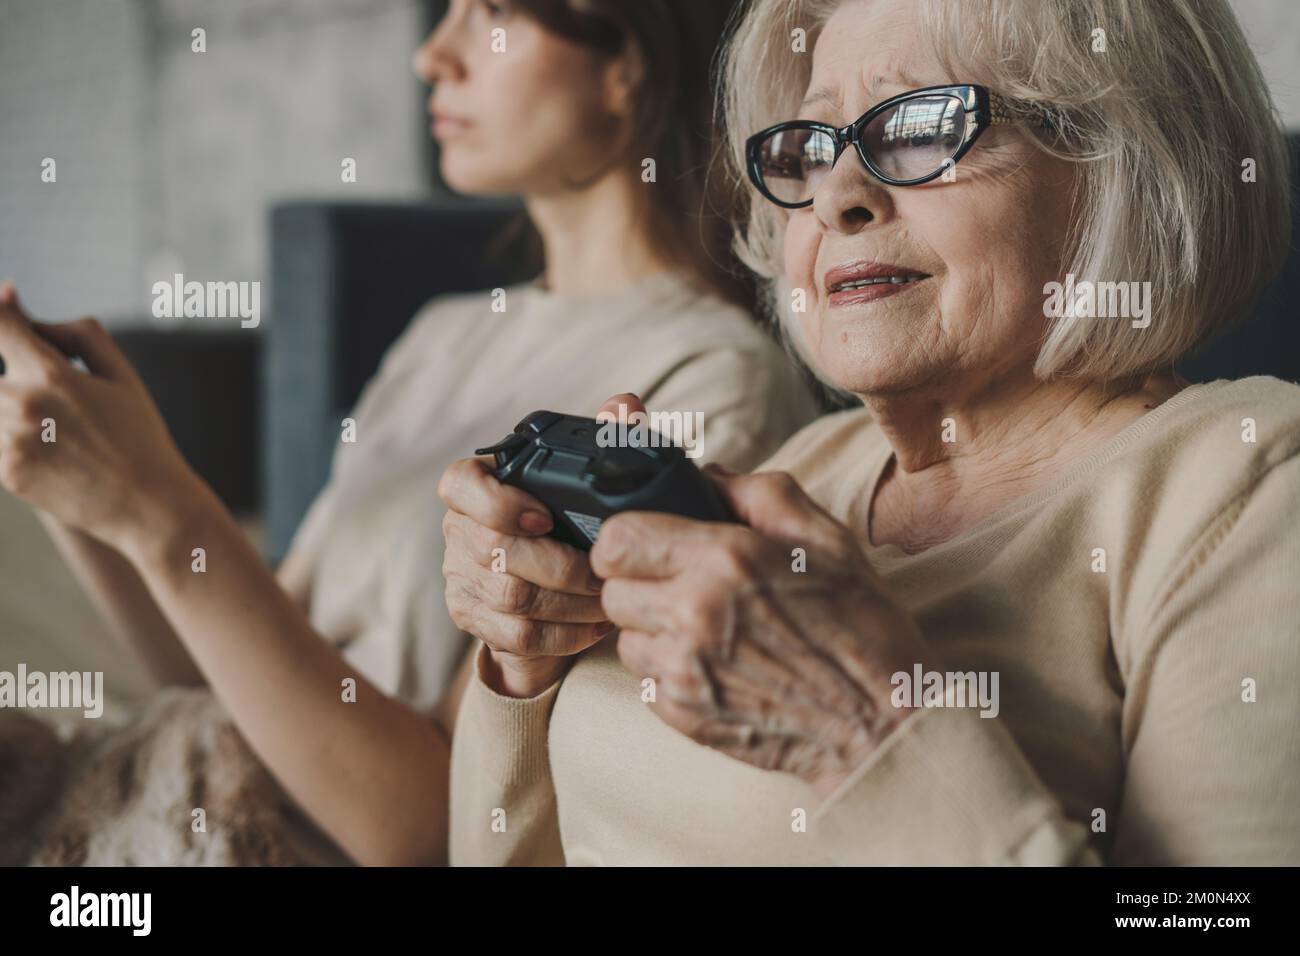 Happy senior mother with daughter using joysticks together, having fun playing video-games. Family home leisure. Happy family. Stock Photo